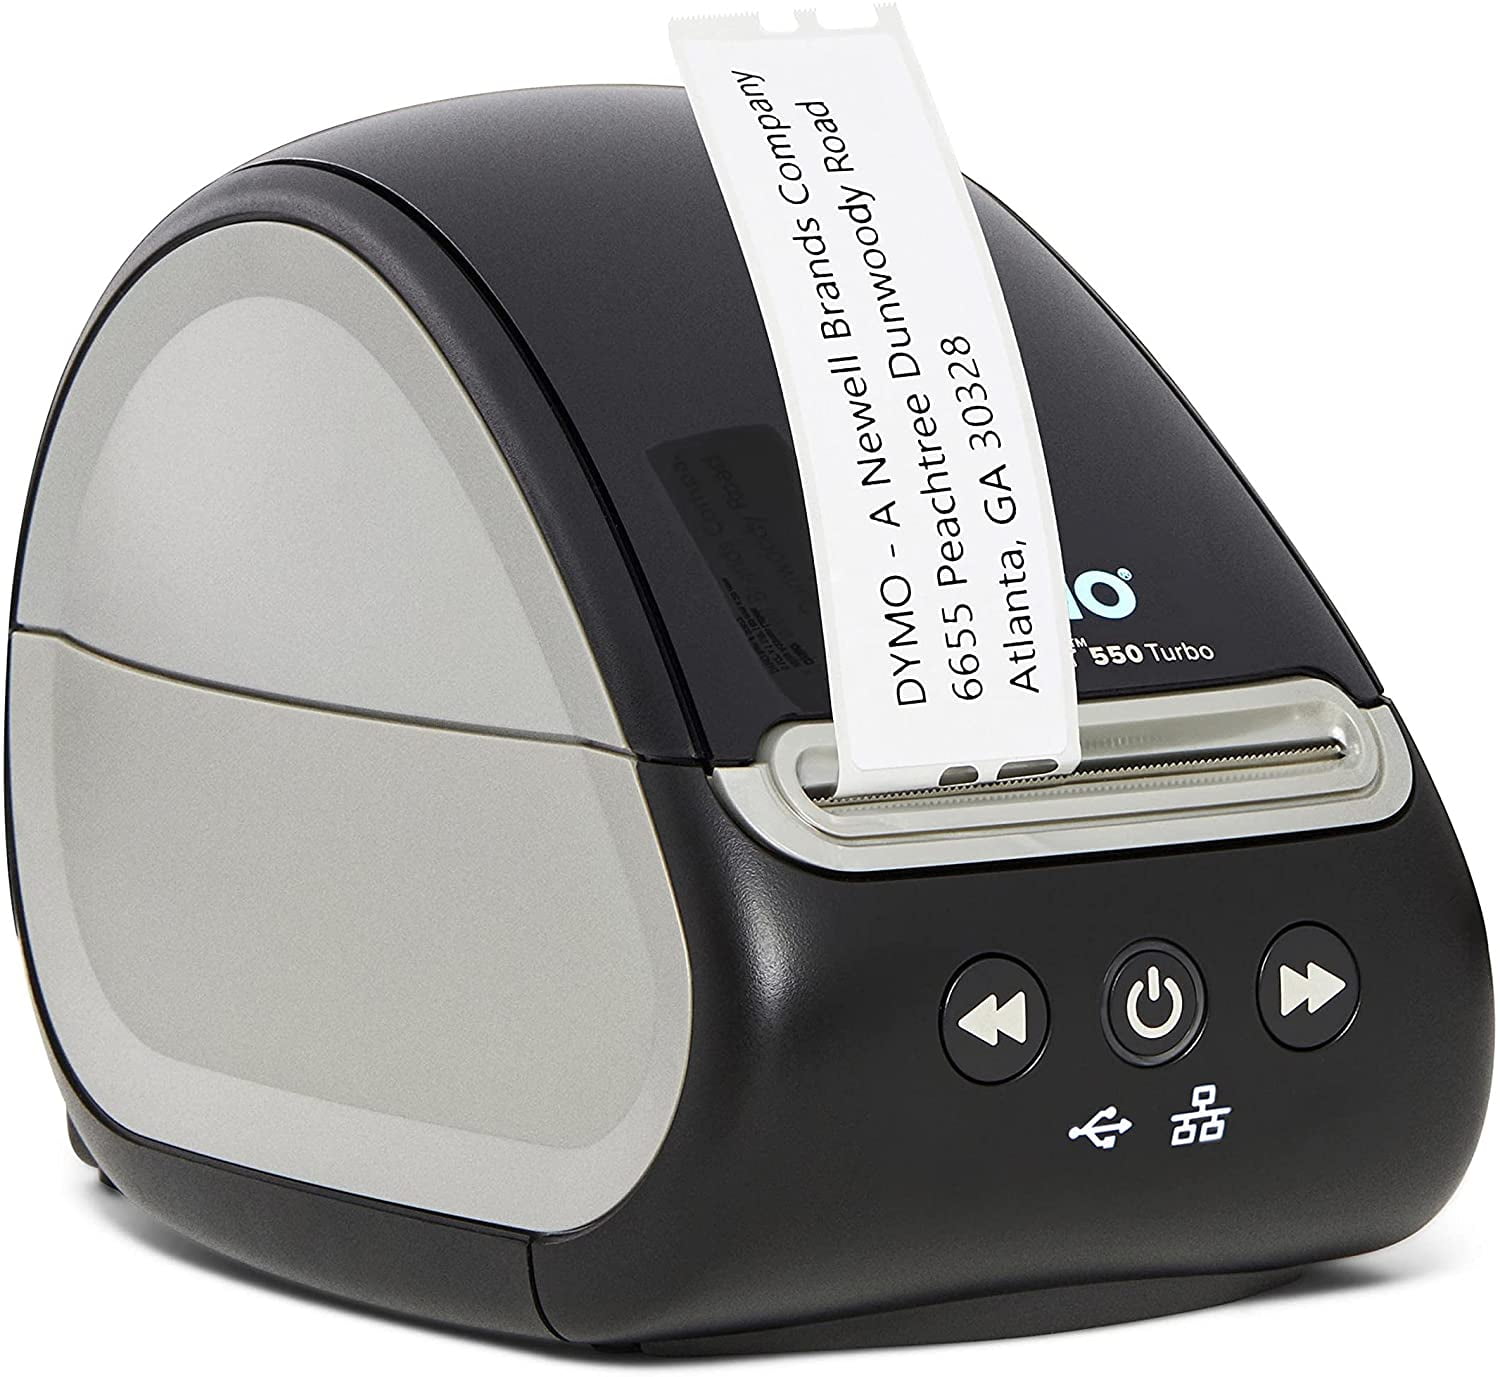 Details about   Dymo Label Printers LabelWriter 450 